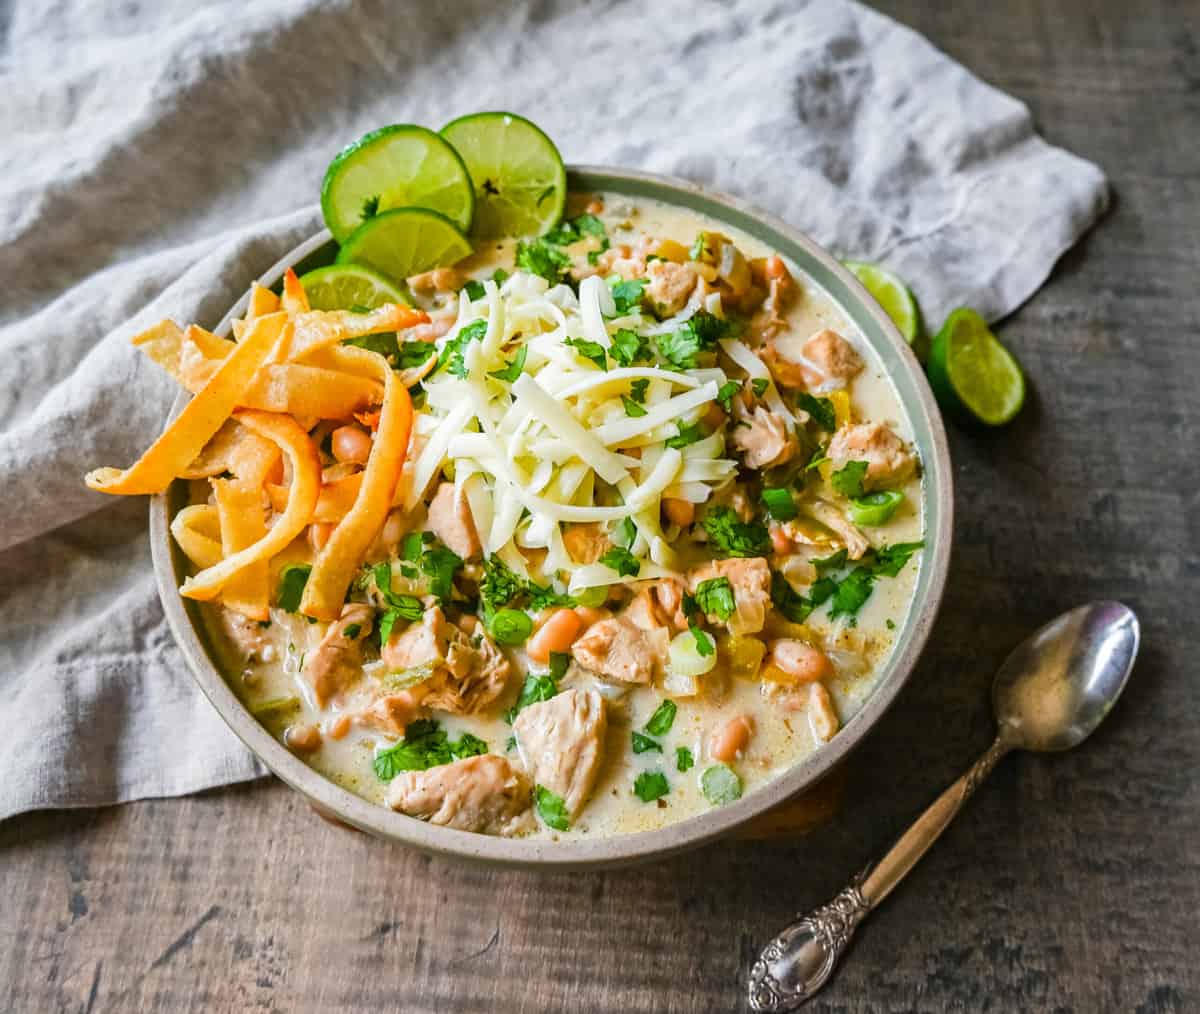 White Chicken Chili. This White Chicken Chili Recipe is so creamy, delicious, and full of flavor. This quick and easy white chicken chili is a family favorite meal!